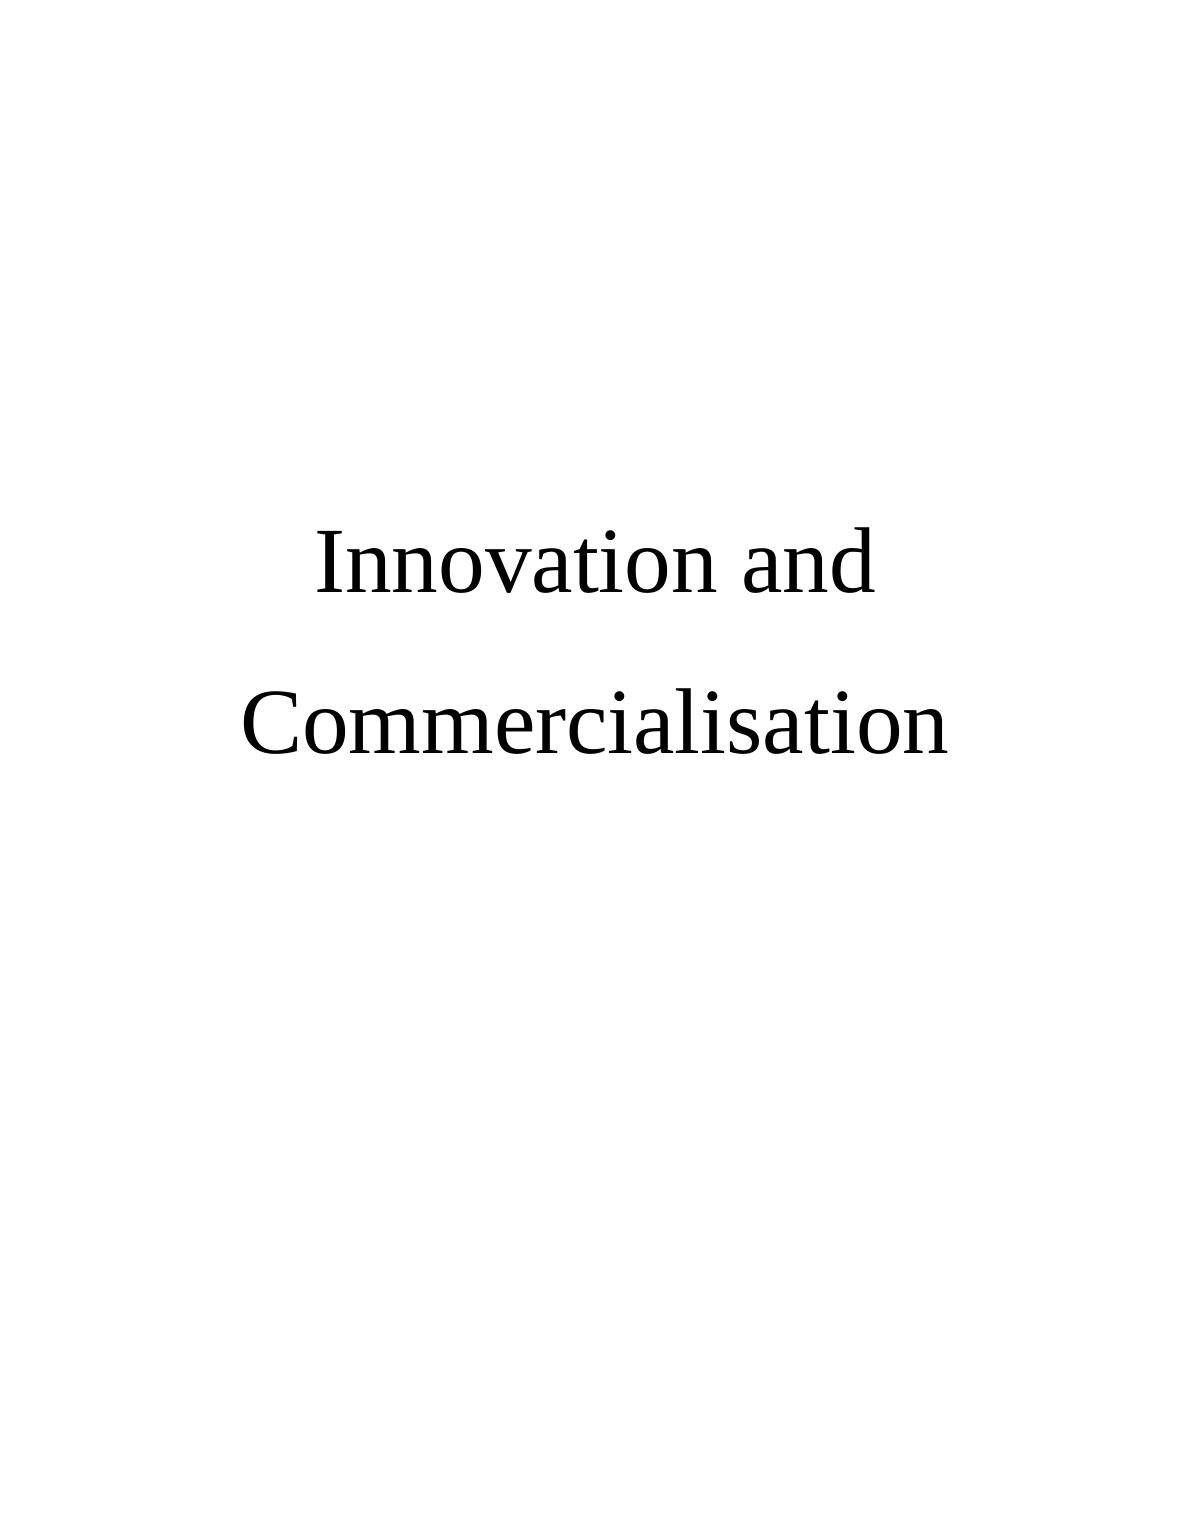 Innovation and Commercialisation in Essence Drinks_1